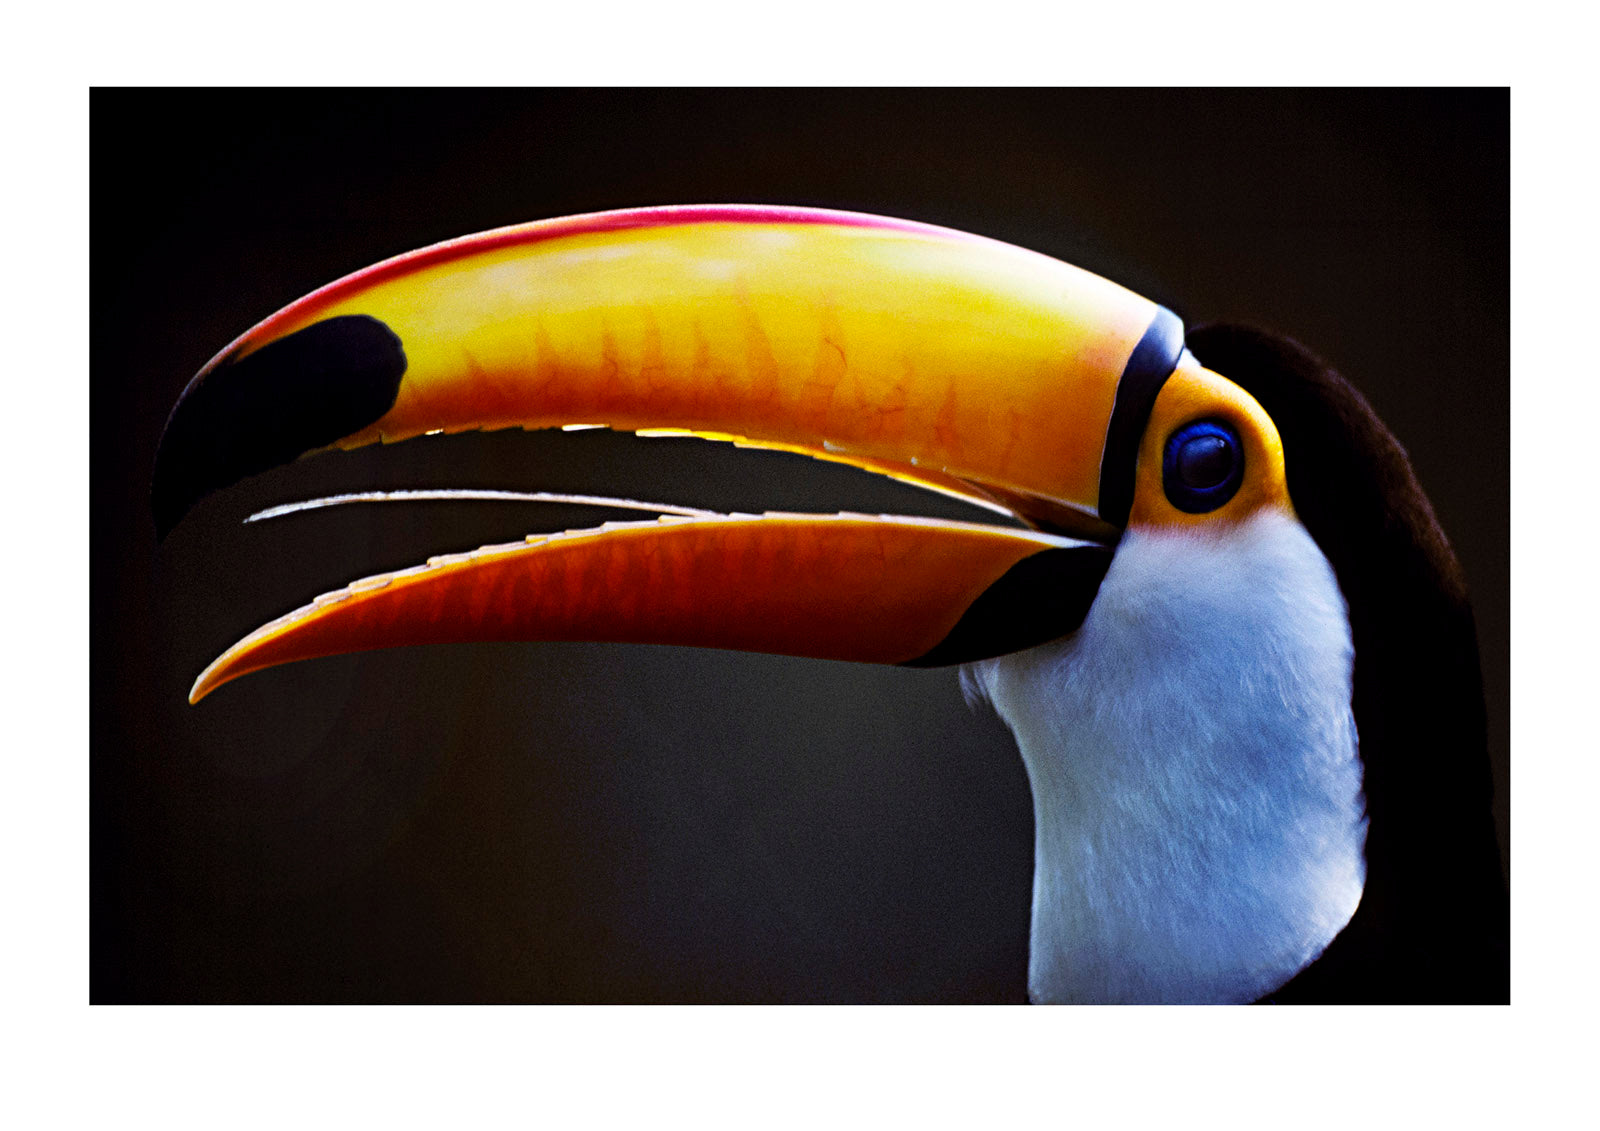 A colorful Toco Toucan's tongue, eye and yellow, orange and red beak. Rio Zoo, Brasil.